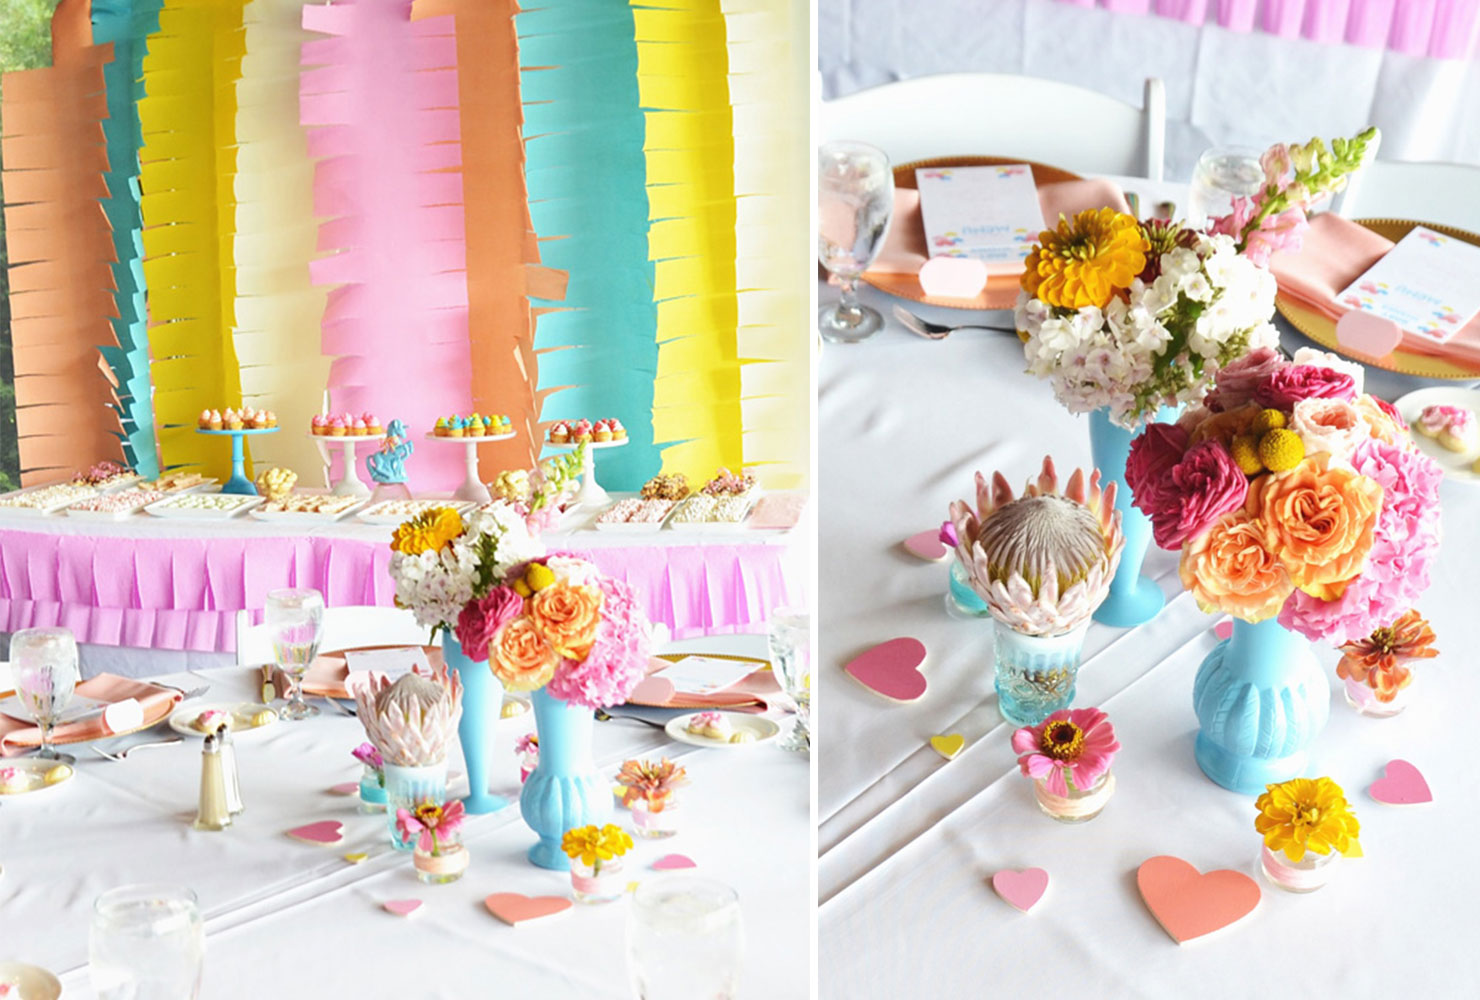 98 Sweet Baby Shower Themes For Girls For 2019 Shutterfly